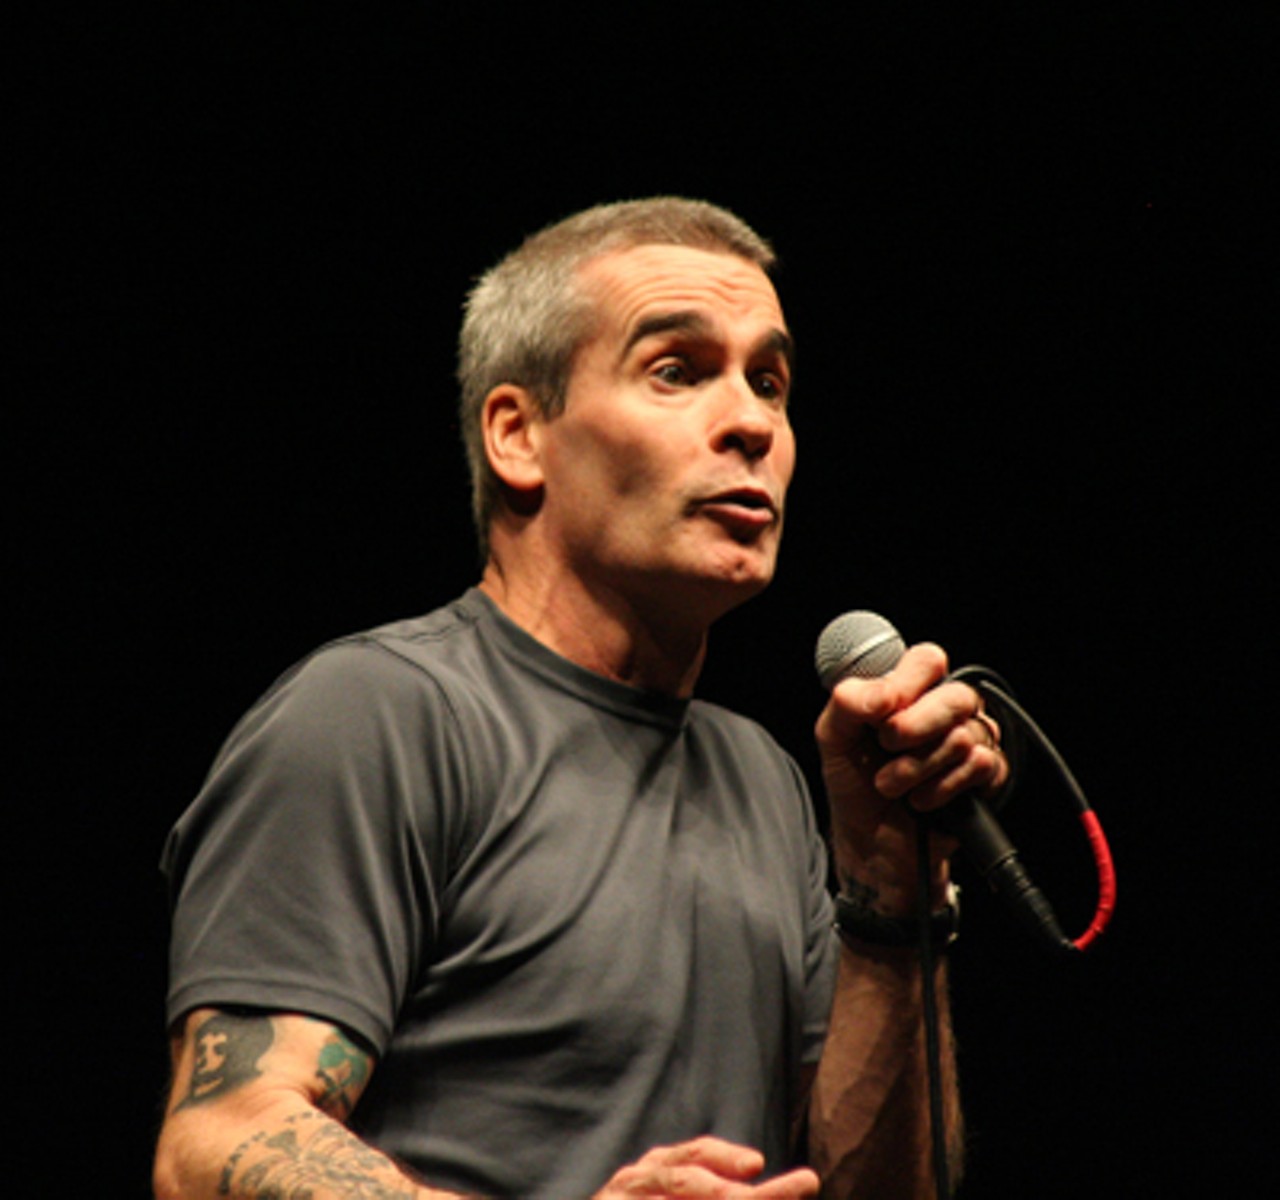 Feigning nerdiness Rollins. 
Read a recap of Rollins' spoken word performance in A to Z.
Read an interview with Rollins in this week's edition, "Get in the Van: Henry Rollins &mdash; musician, spoken-word artist, writer and punk legend &mdash; talks about life on the road.". 
We also posted outtakes from that interview in A to Z.